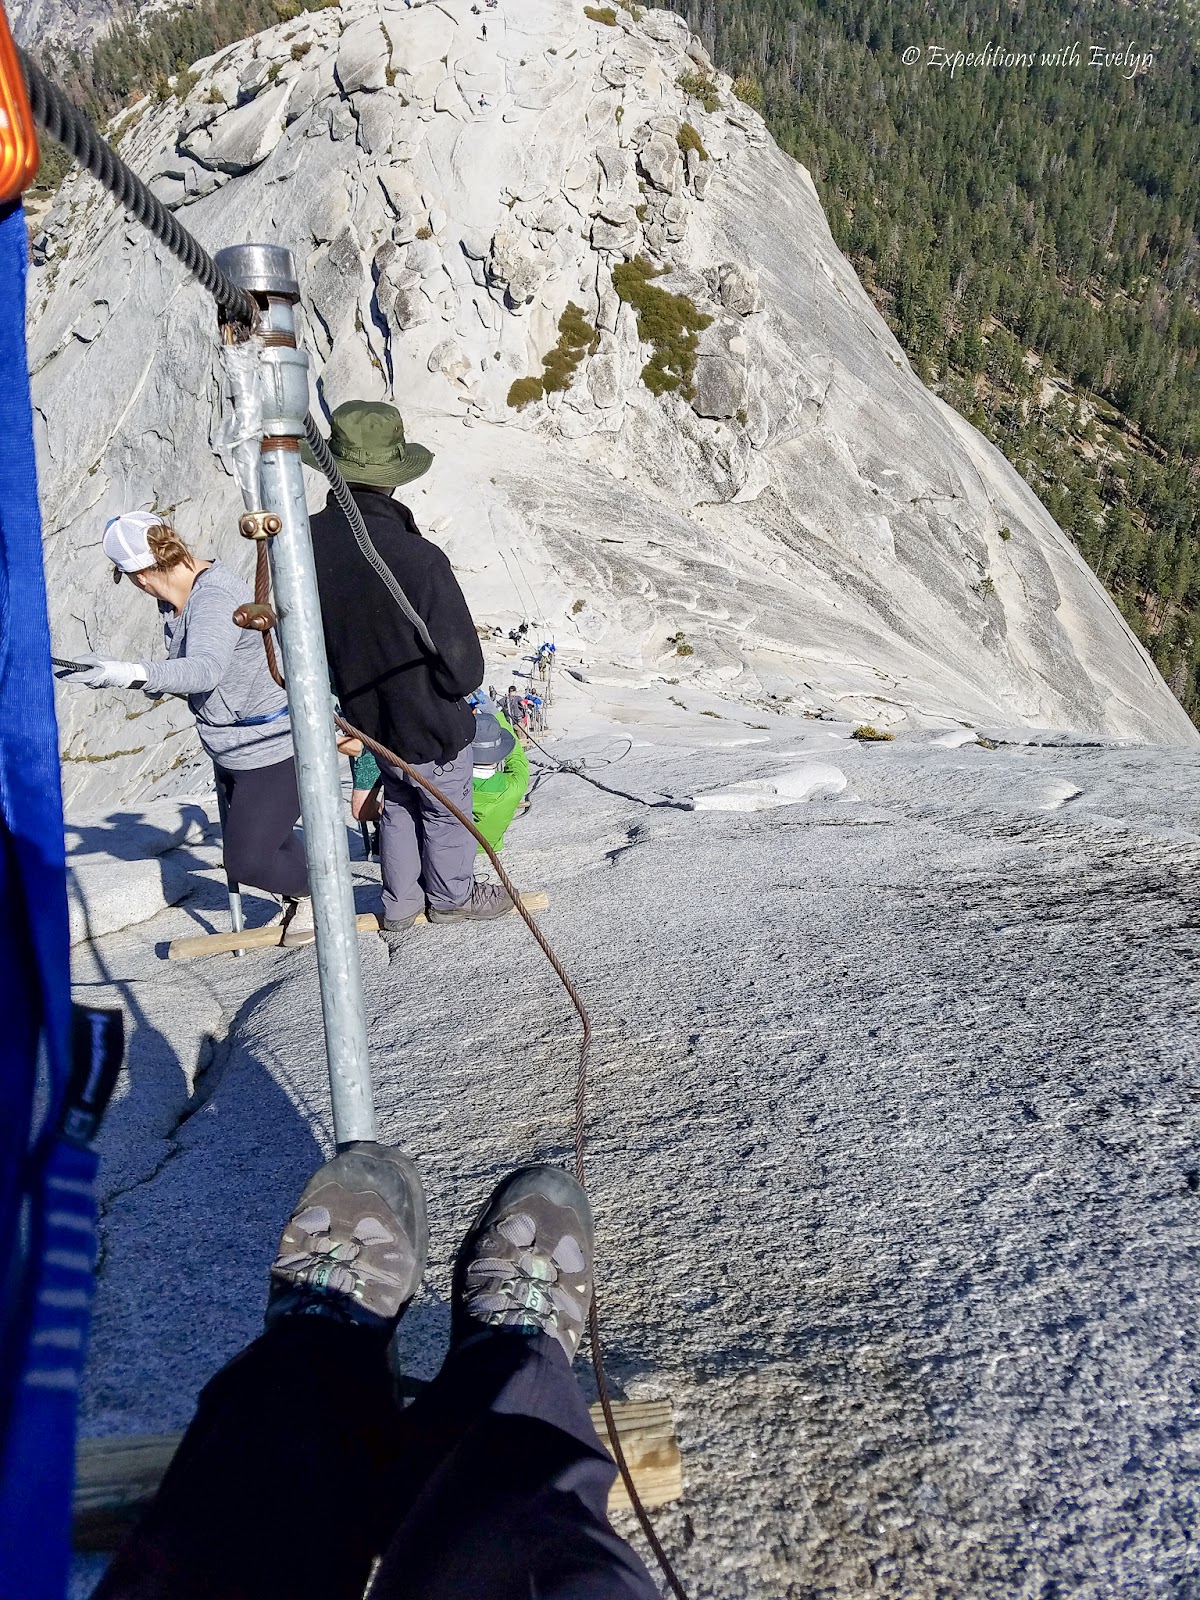 A birds eye view of descending the Half Dome Cables., steel poles that hold up steel cables for hikers to grip.  On the slick granite ground, wooden beams provide traction at intervals.